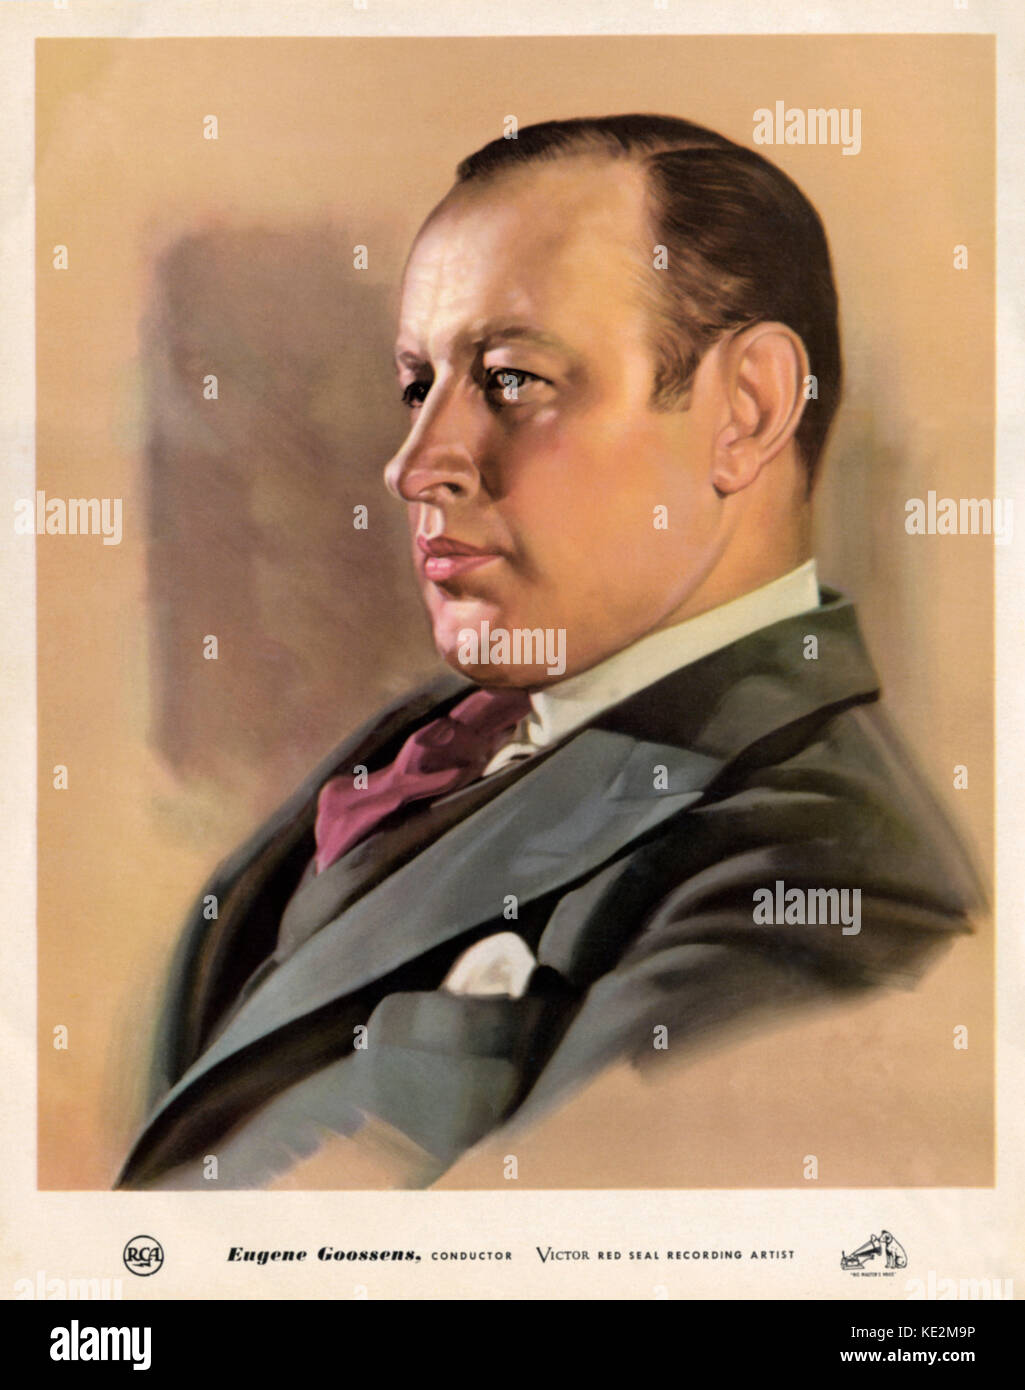 Sir Eugene Goossens -   English conductor and composer, 26 May 1893 - 13 June 1962 - painting style poster Stock Photo